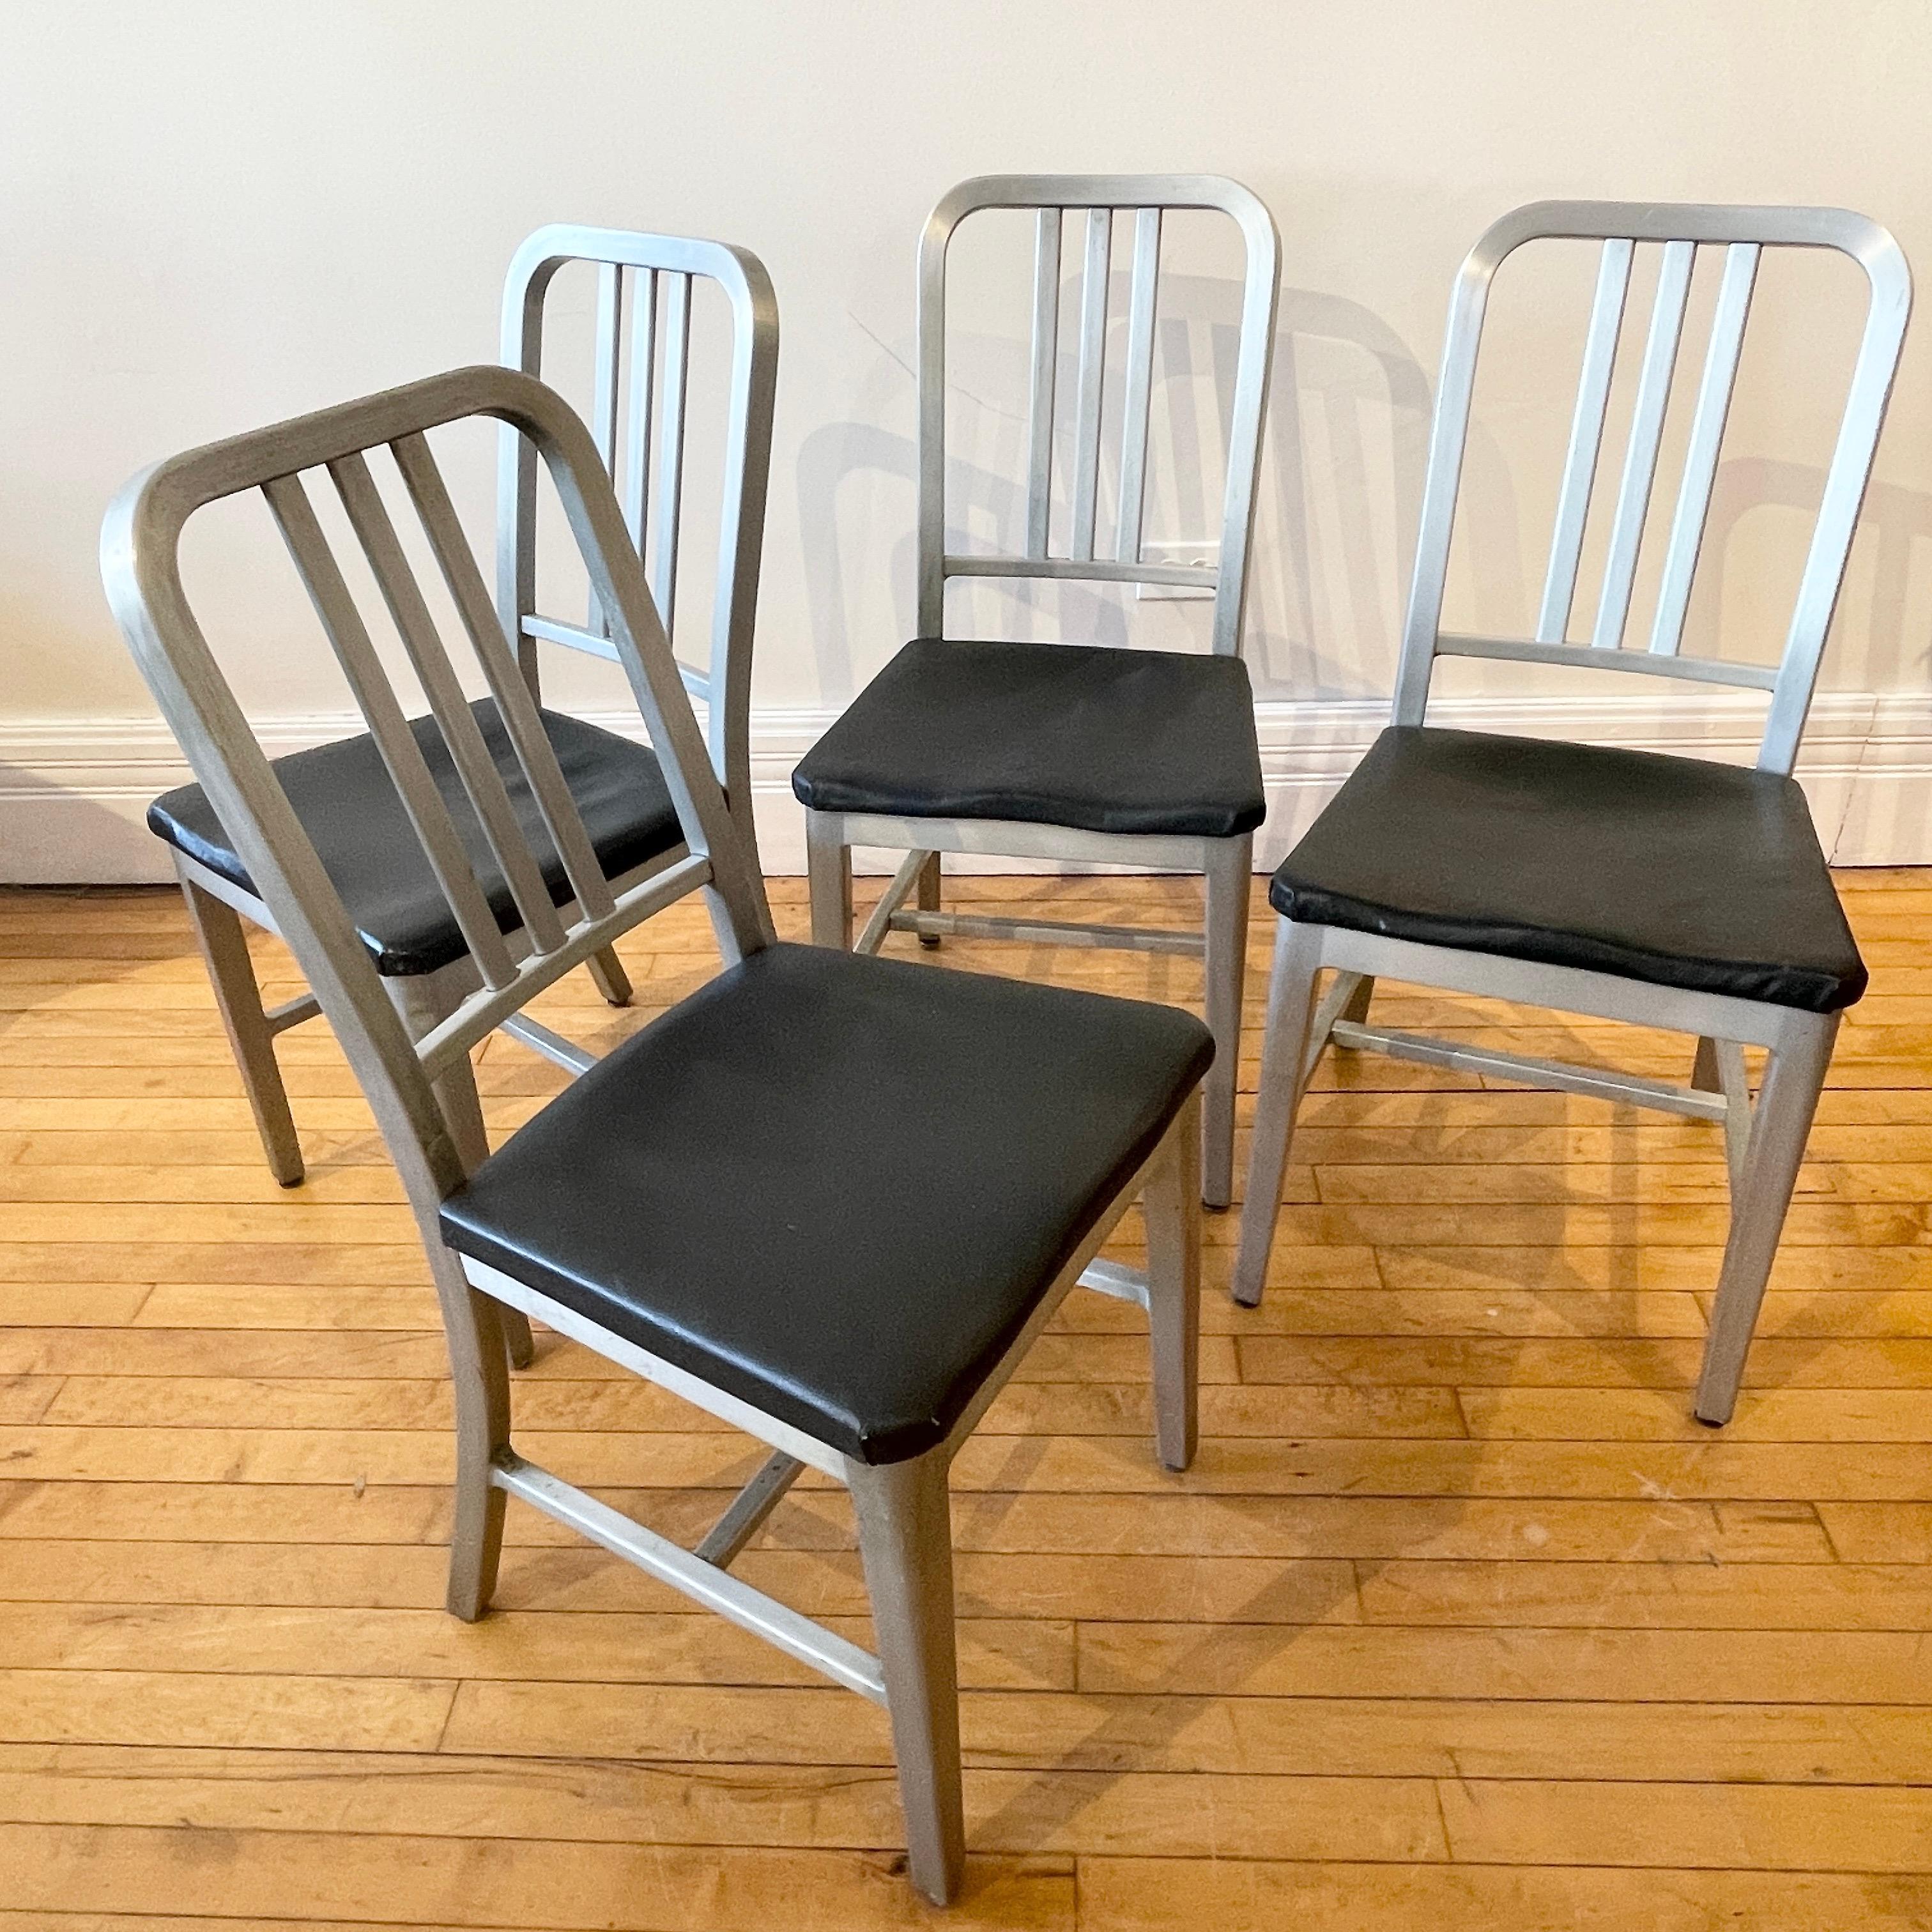 Early Original Navy Chairs by Goodform / General Fireproofing 60 Available 2